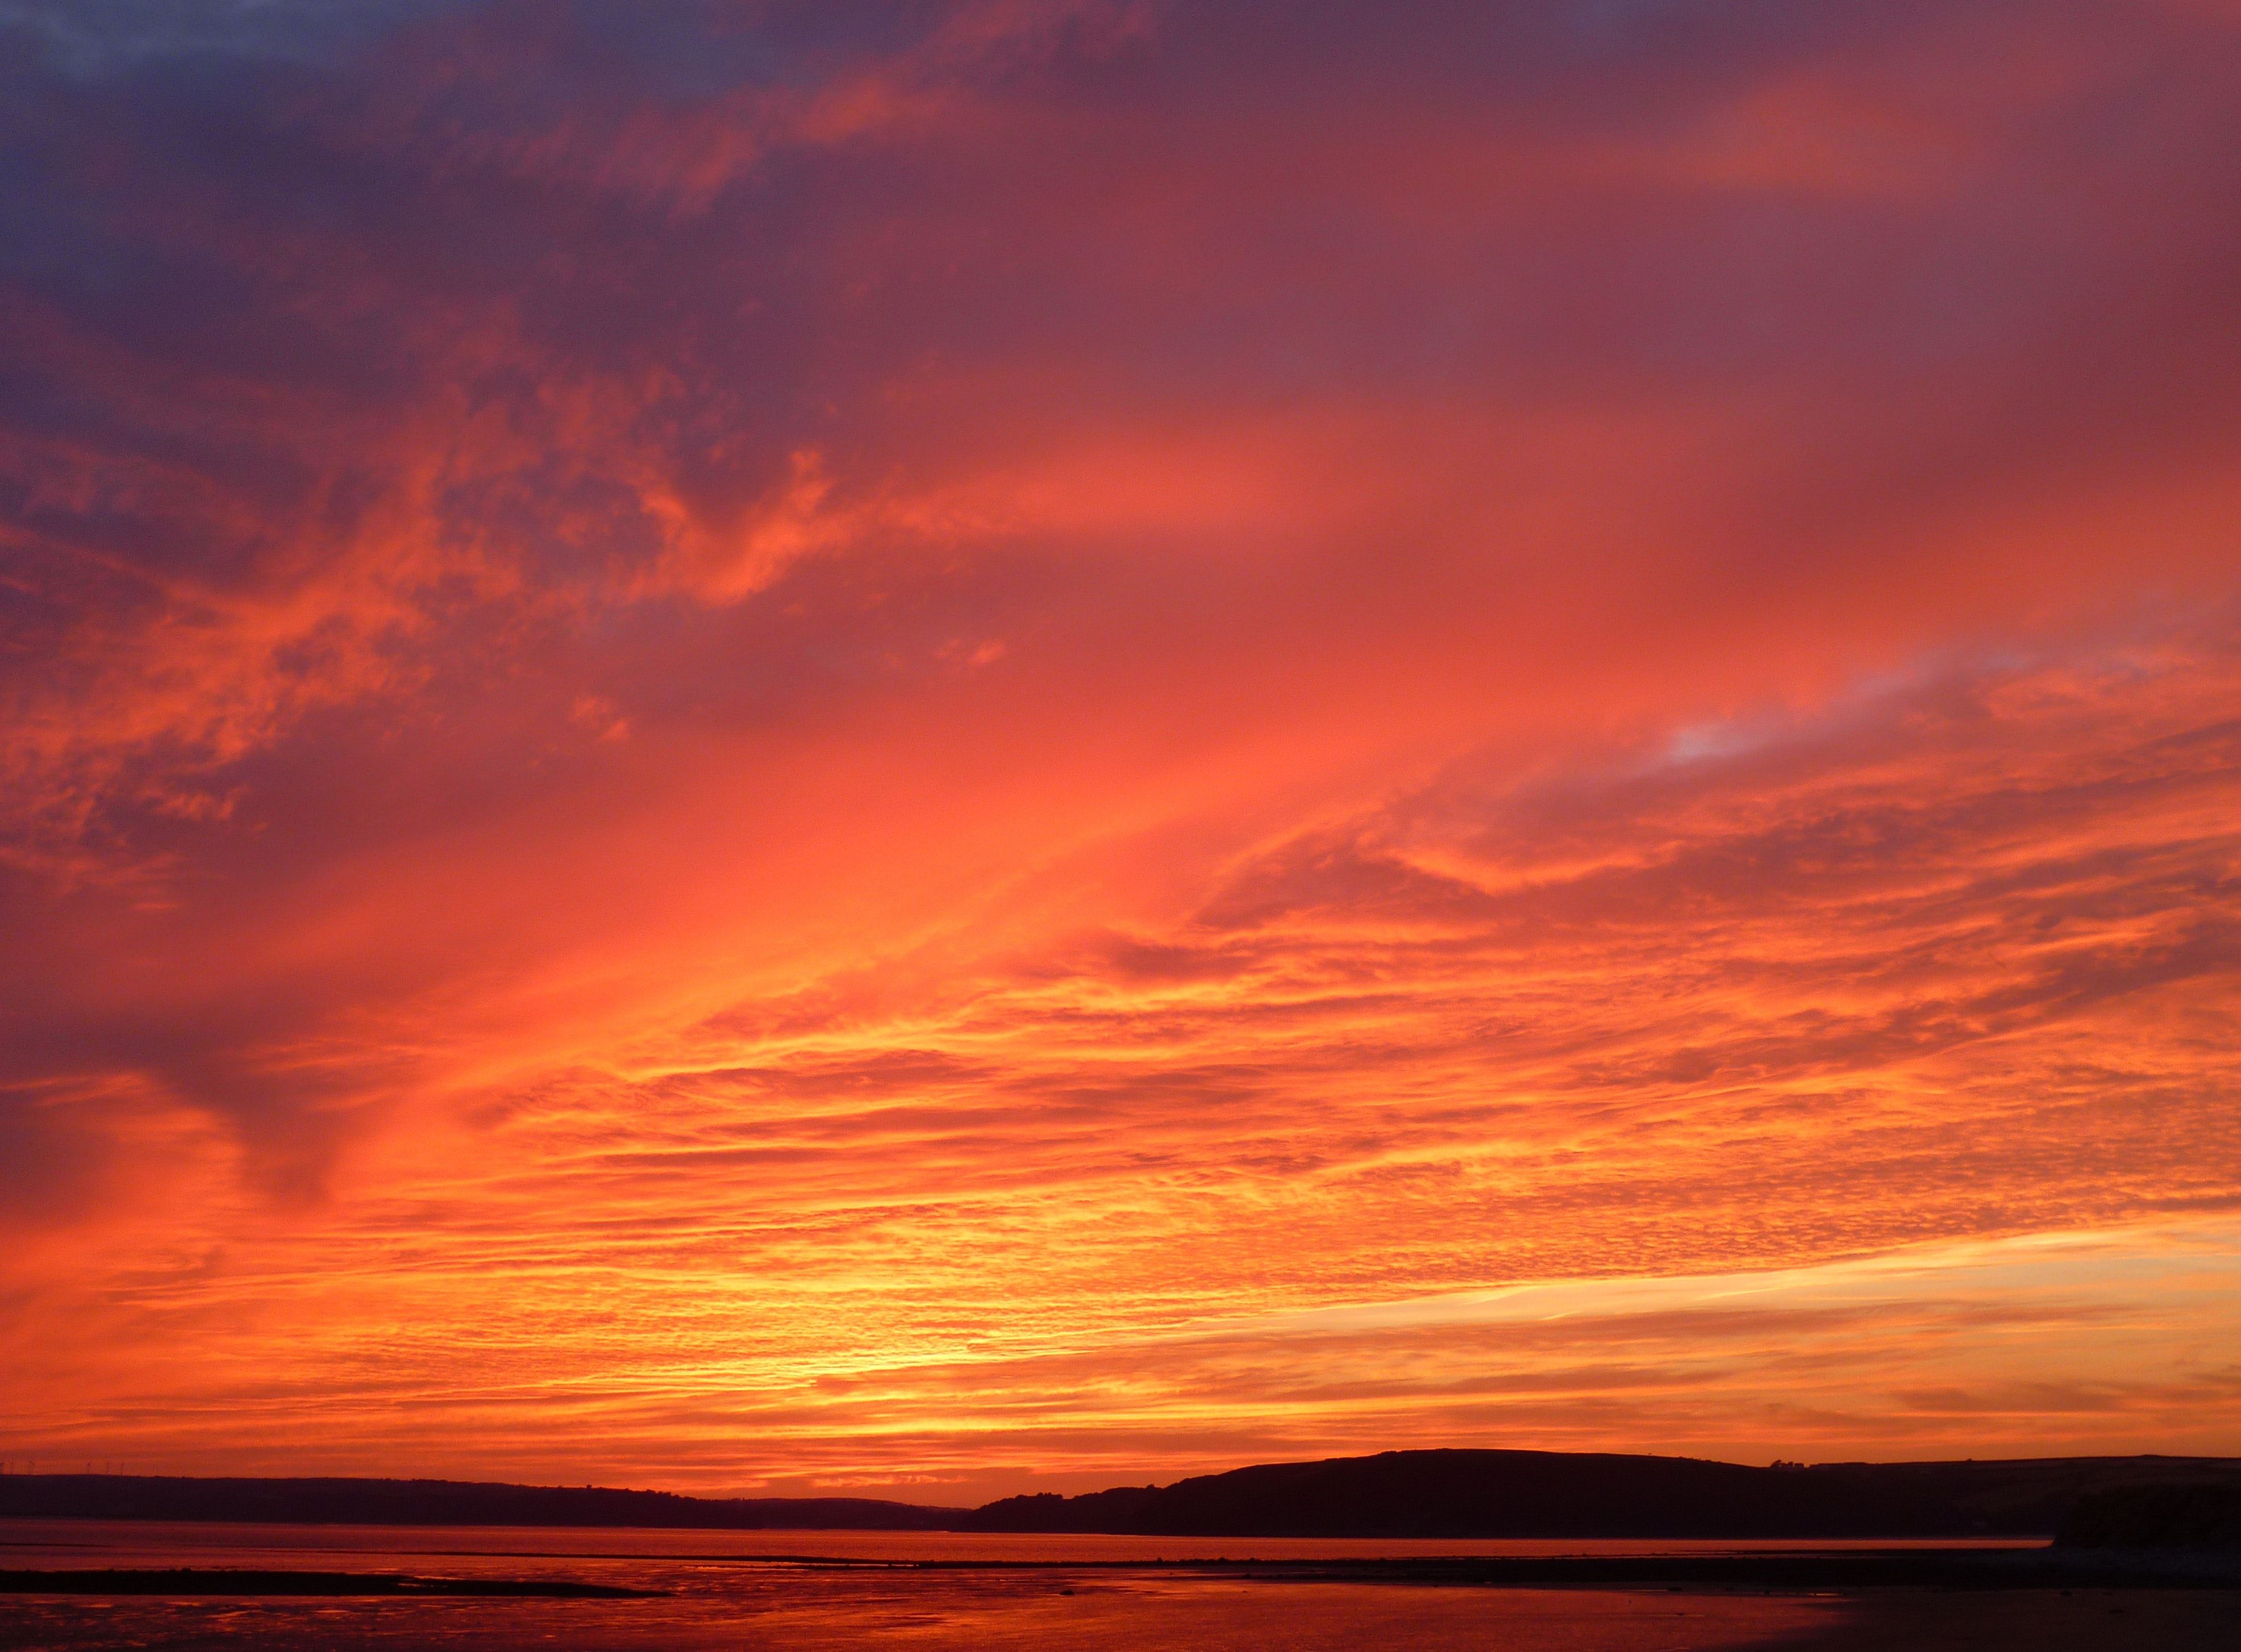 A dramatic red and orange sunset over a body of water - Landscape